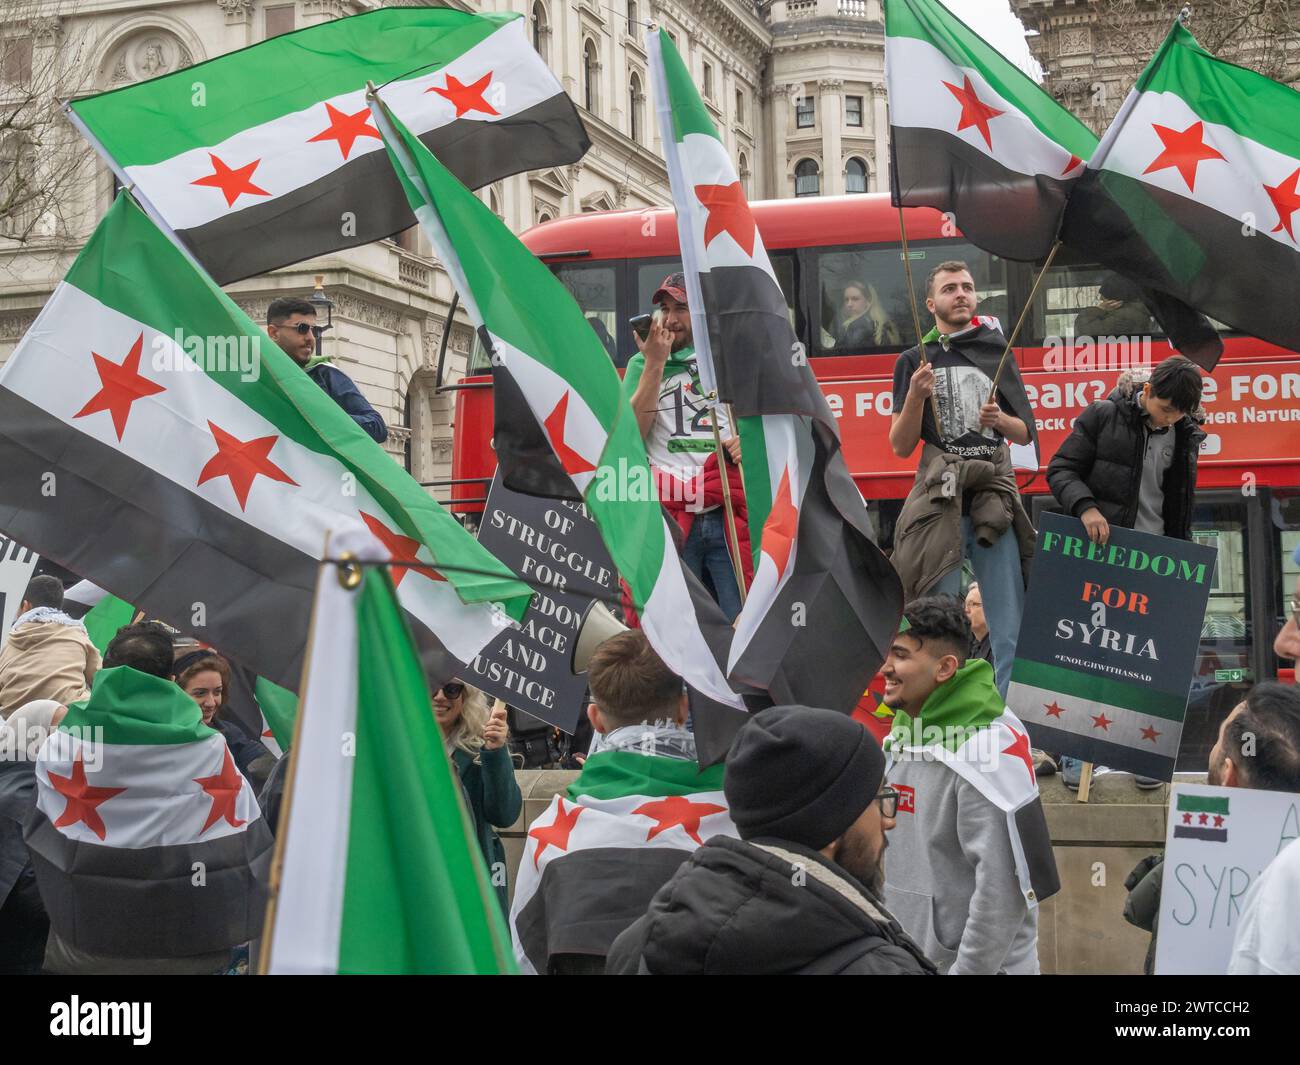 London, UK. 16 March 2024.  Syrians protest at Downing St on the 13th Anniversary of the Syrian Revolution. More than half of Syria's population have been displaced with millions fleeing the country as the Asdsad regime has committed unspeakable atrocities against the people of Syria, who rose up peacefully for democracy, reforms, and accountability. They called on everyone to remember those many Syrians who have been killed and to continue to support the demands for democracy, reforms and accountability. Peter Marshall/Alamy Live News Stock Photo